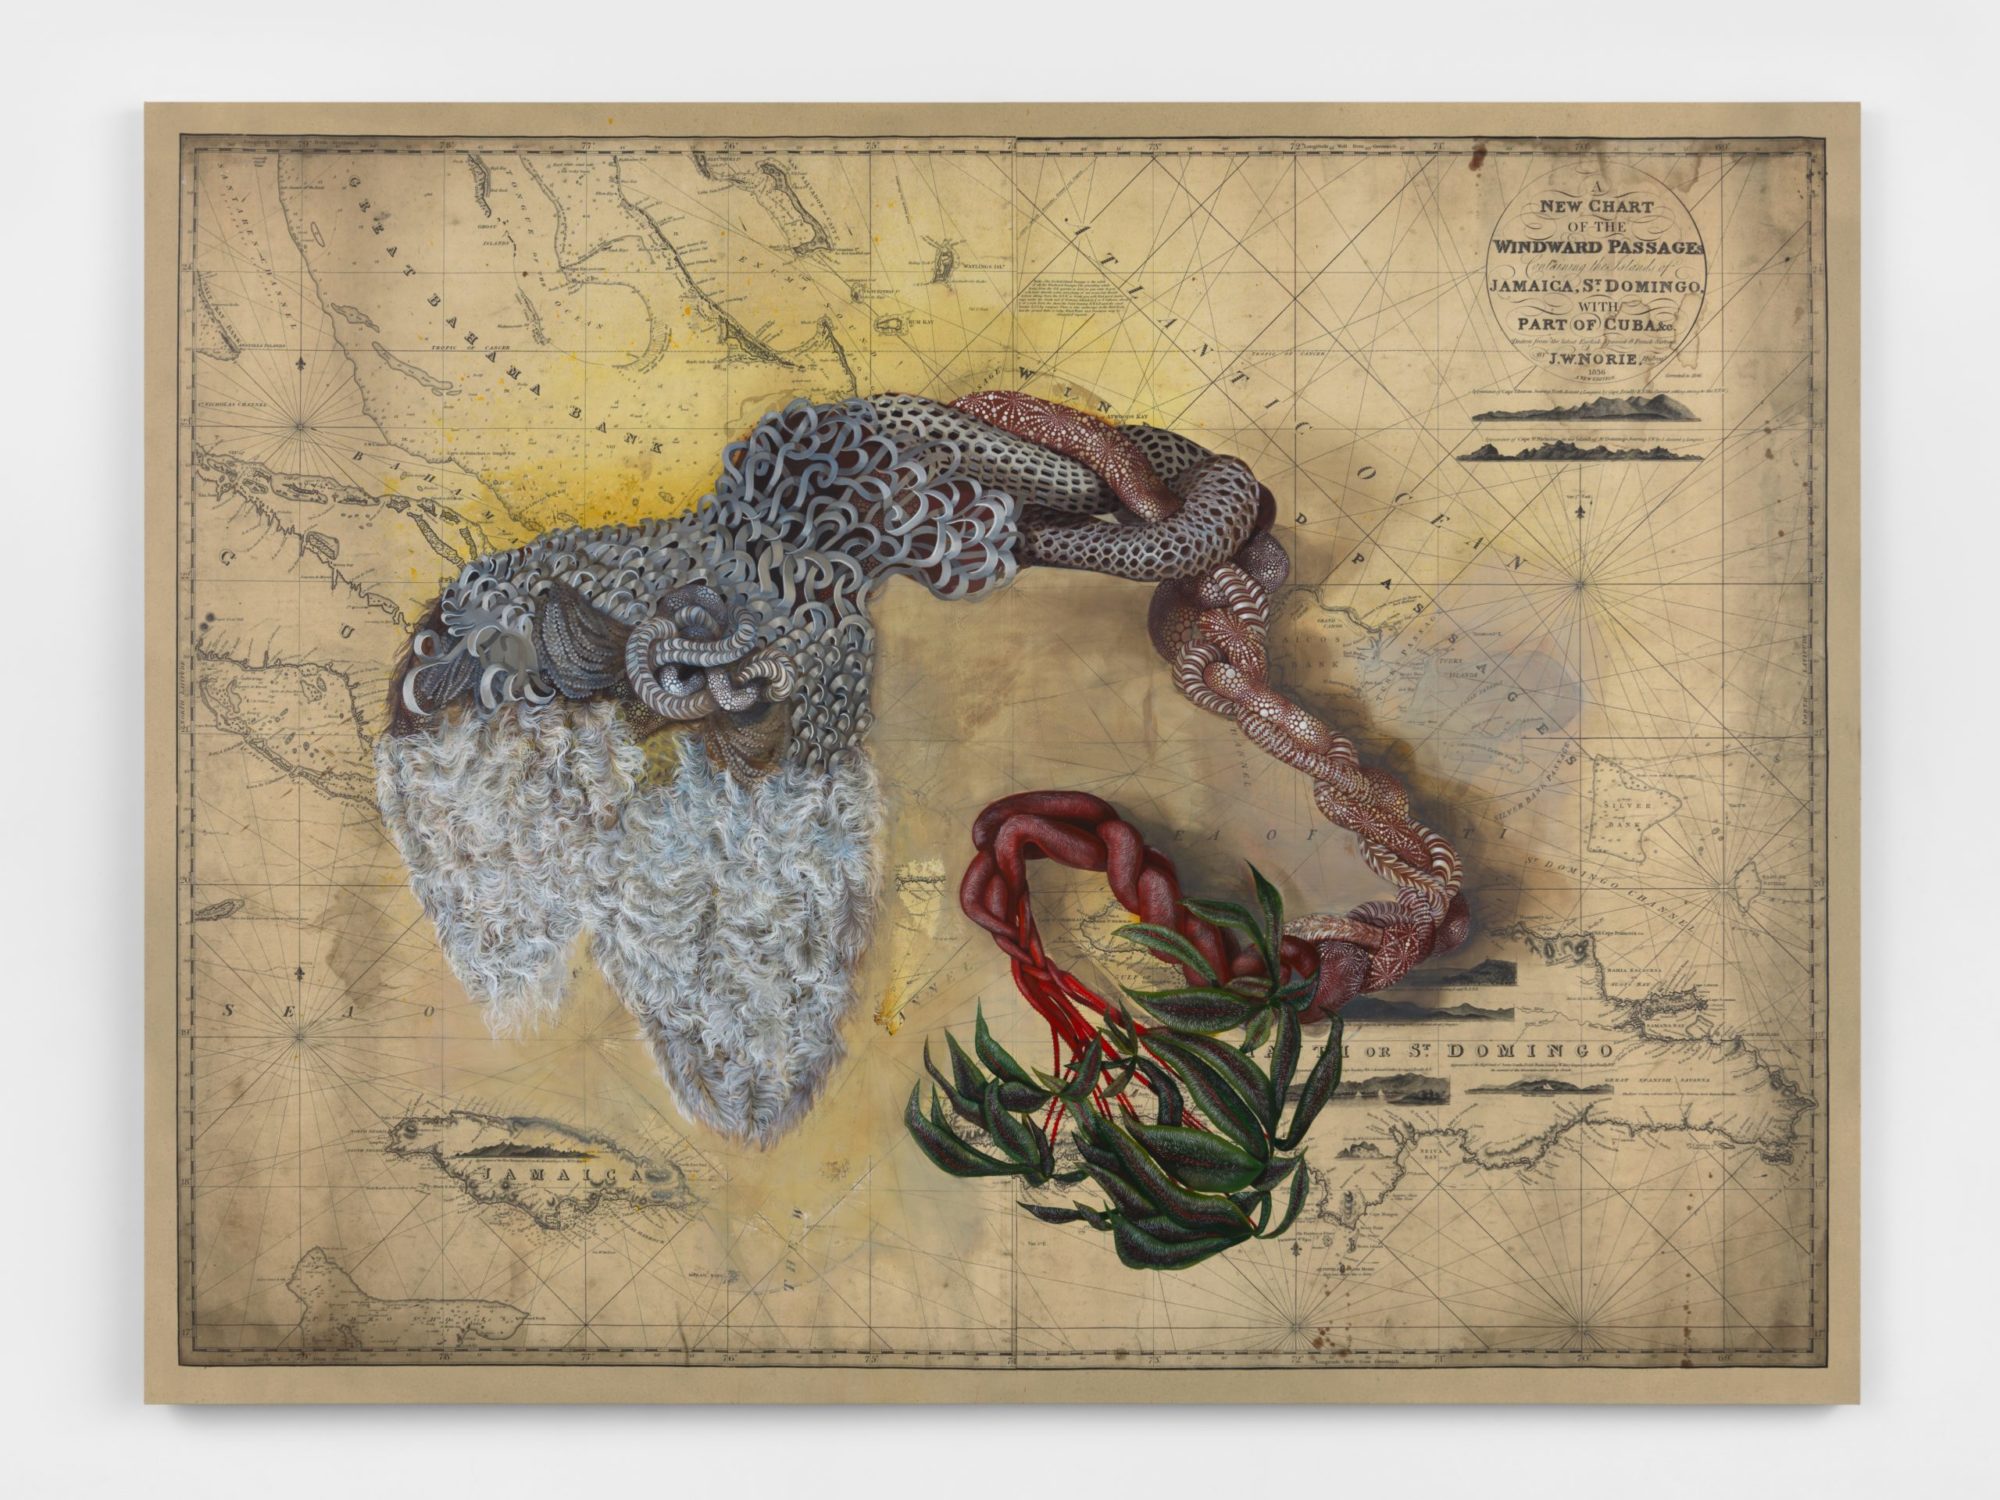 An oil and acrylic painting which shows a woven mermaid tail on top a printed canvas of an old map showcasing the Islands of Jamaica, St. Domingo, with Part of Cuba.